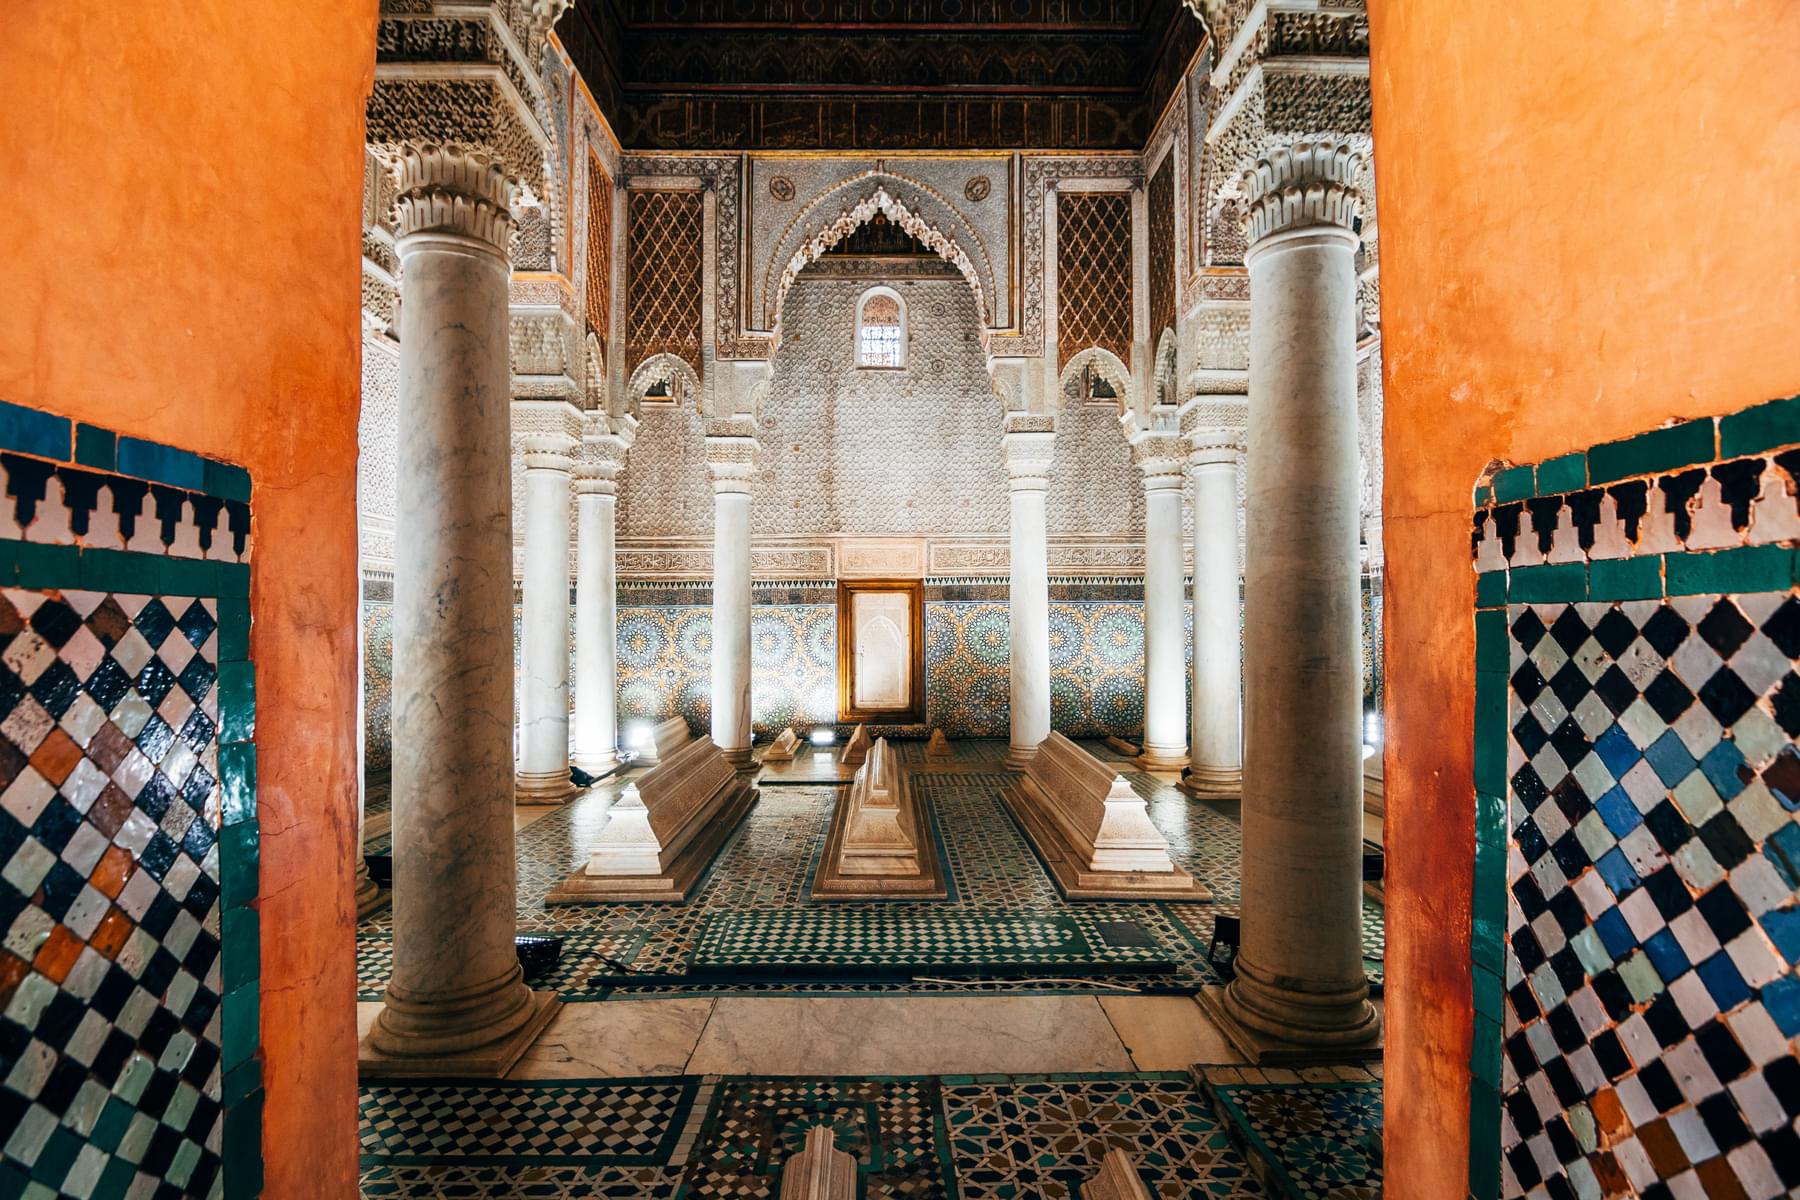 Check Out the Saadian Tombs